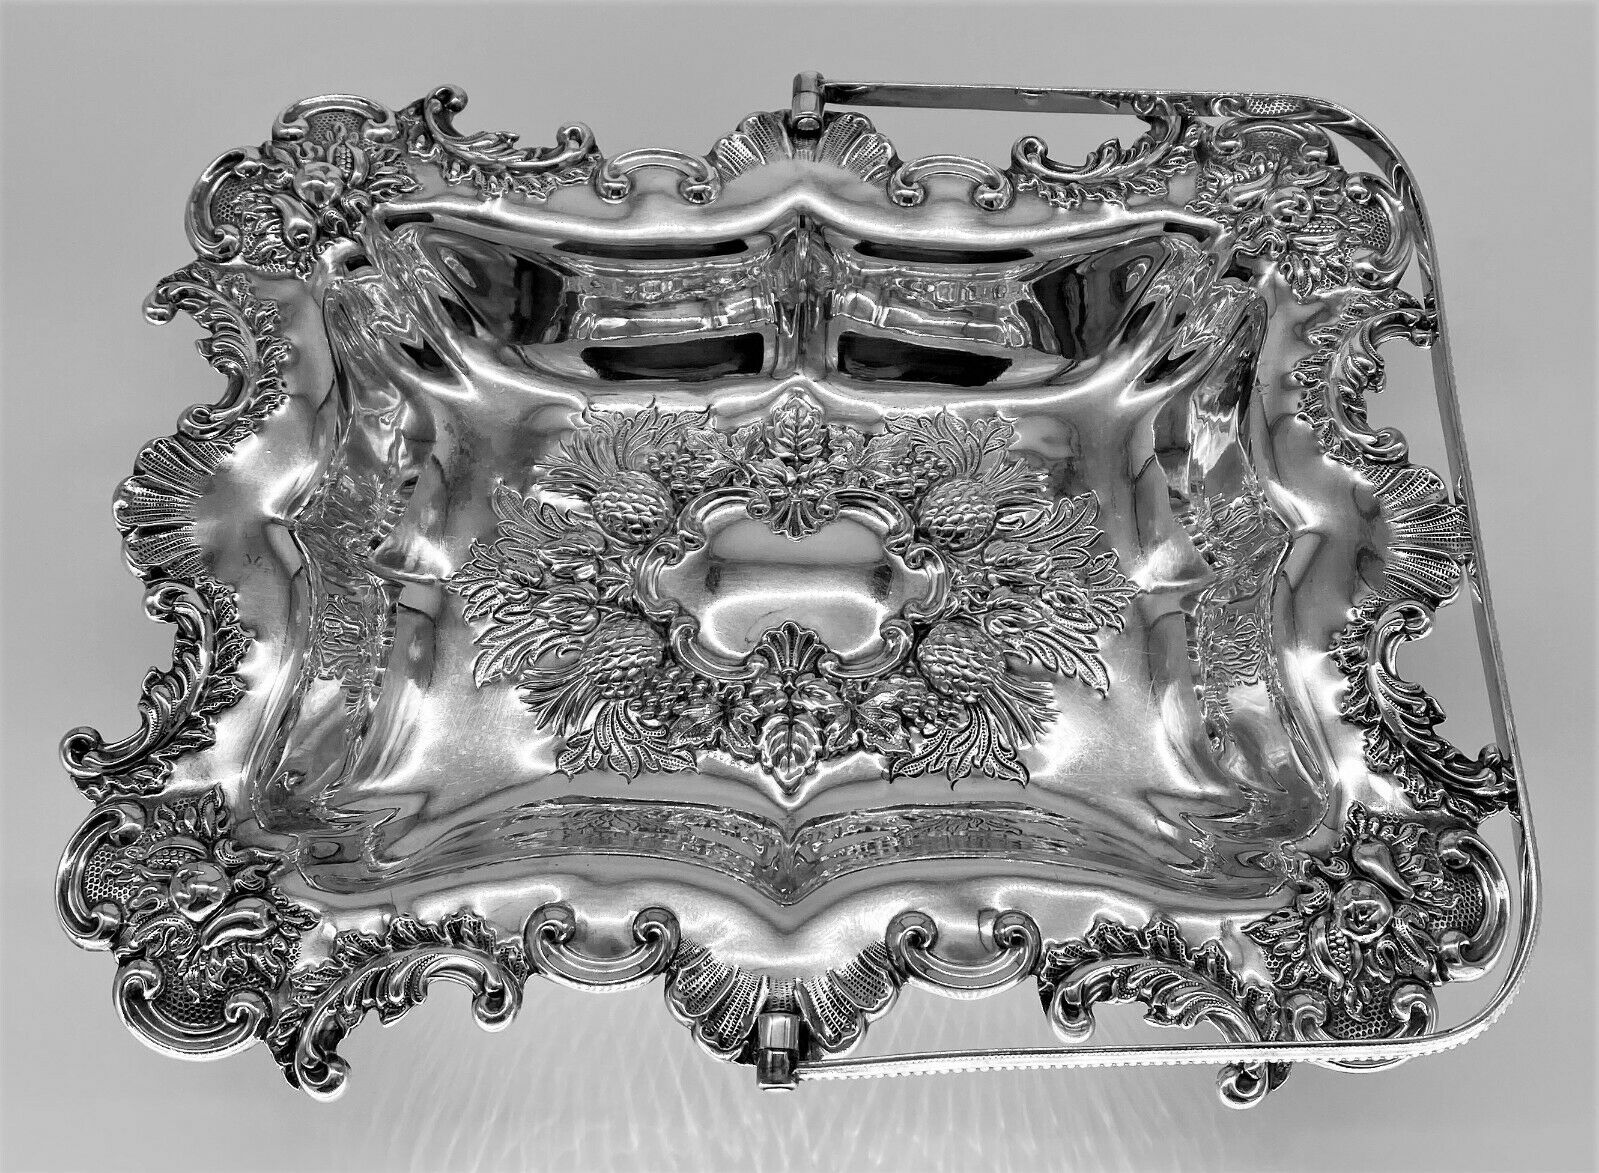 Antique Handled Tray Basket Silver Plate "sheffield Plate" Gorgeous Hallmarked